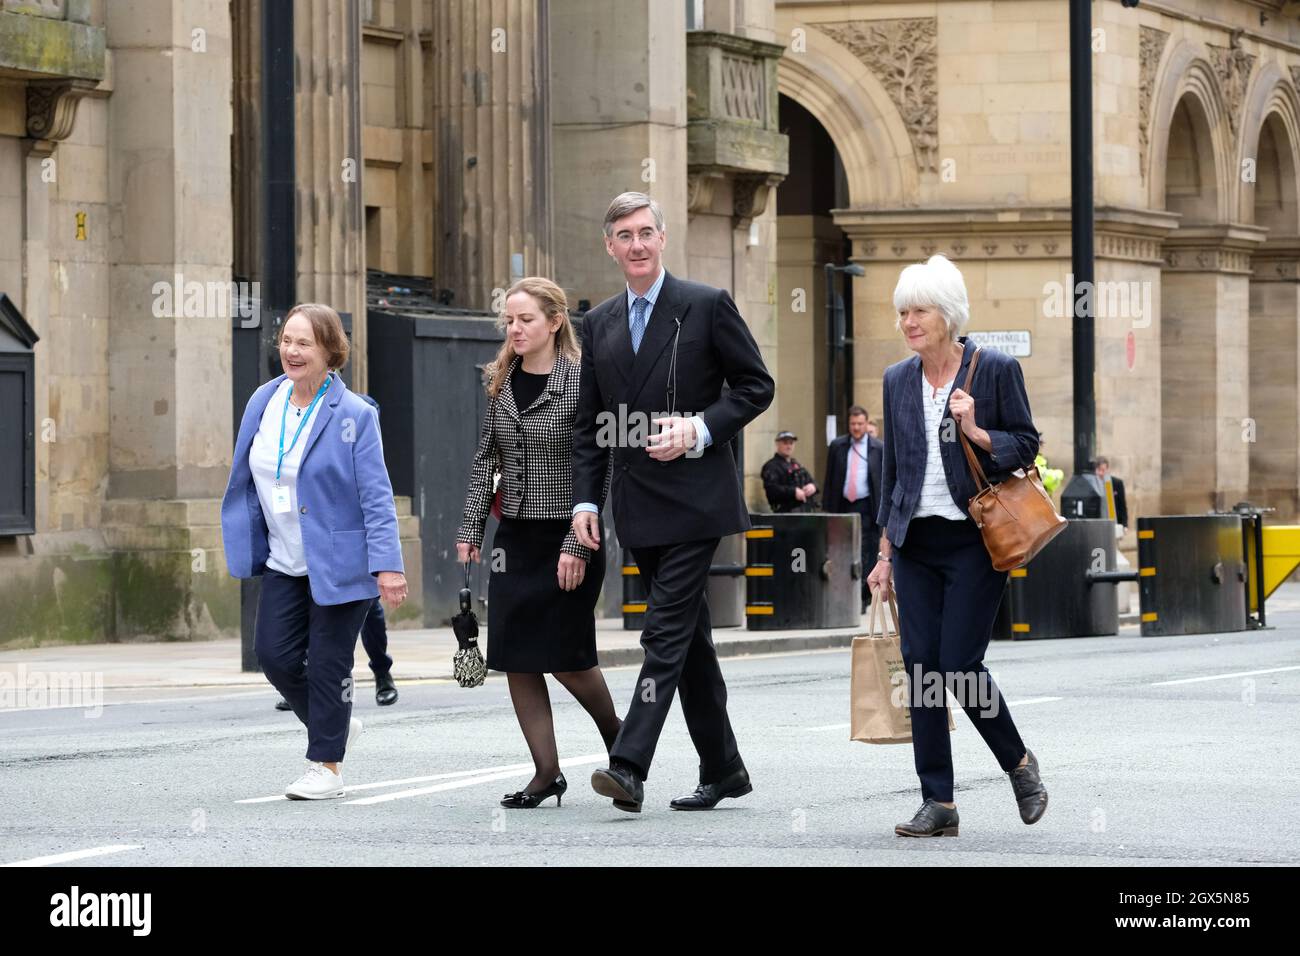 Manchester, UK – Monday 4th October 2021 – Conservative MP Jacob Rees-Mogg outside the Conservative Party Conference in Manchester. Photo Steven May / Alamy Live News Stock Photo